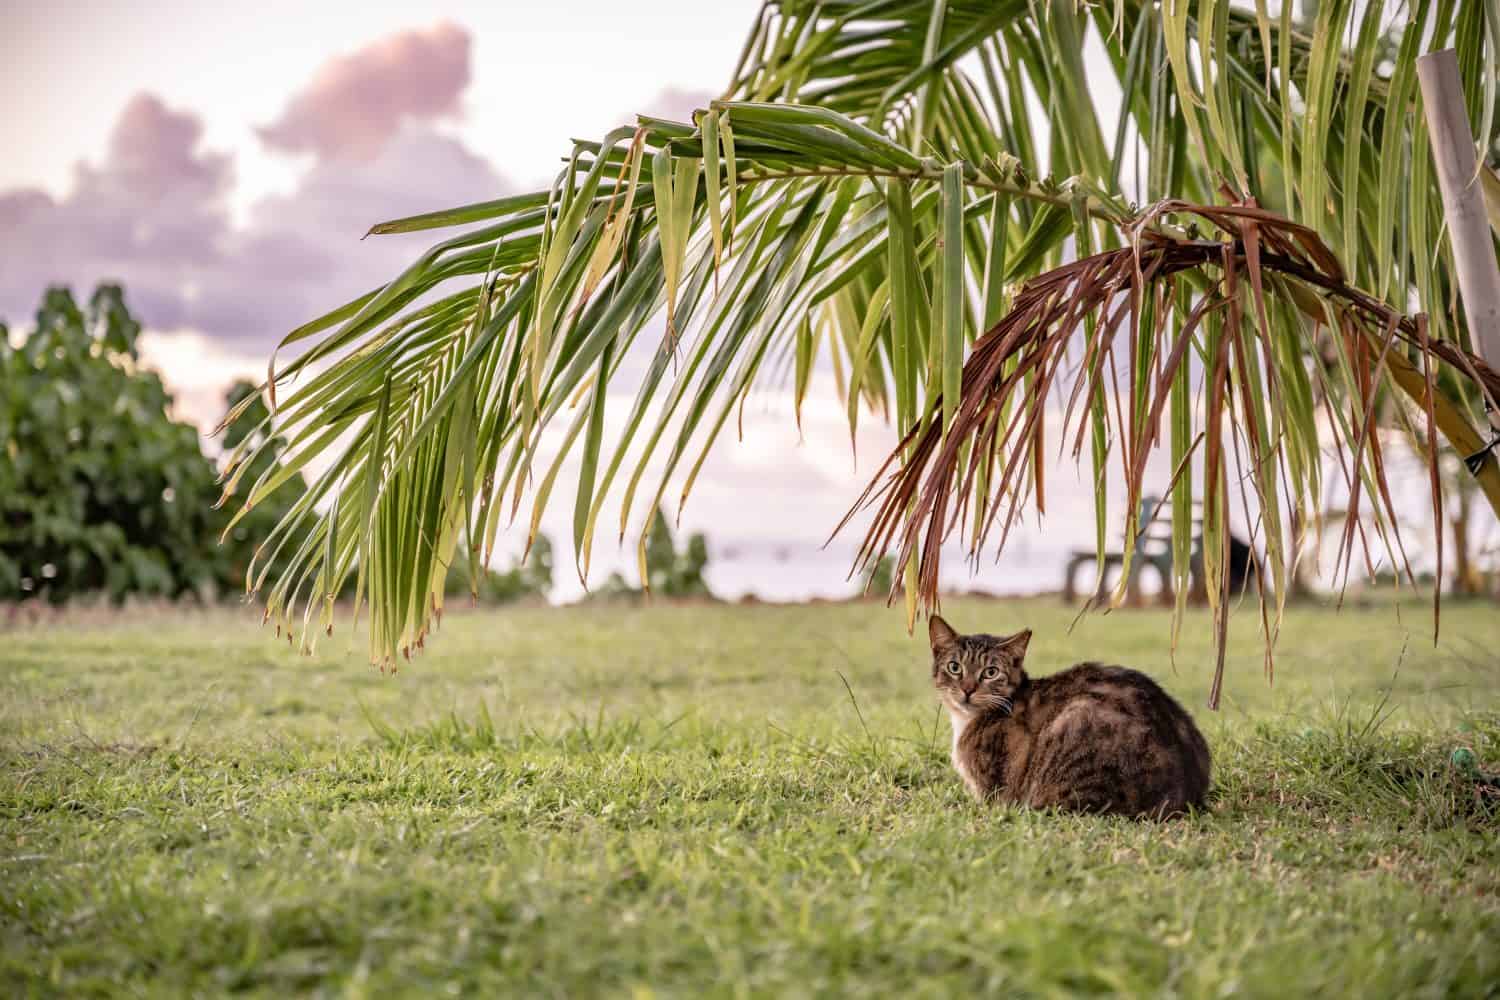 A beautiful outdoor cat relaxes under a palm tree by the ocean in Honolulu, Hawaii, at the Ala Moana Harbor, downtown.